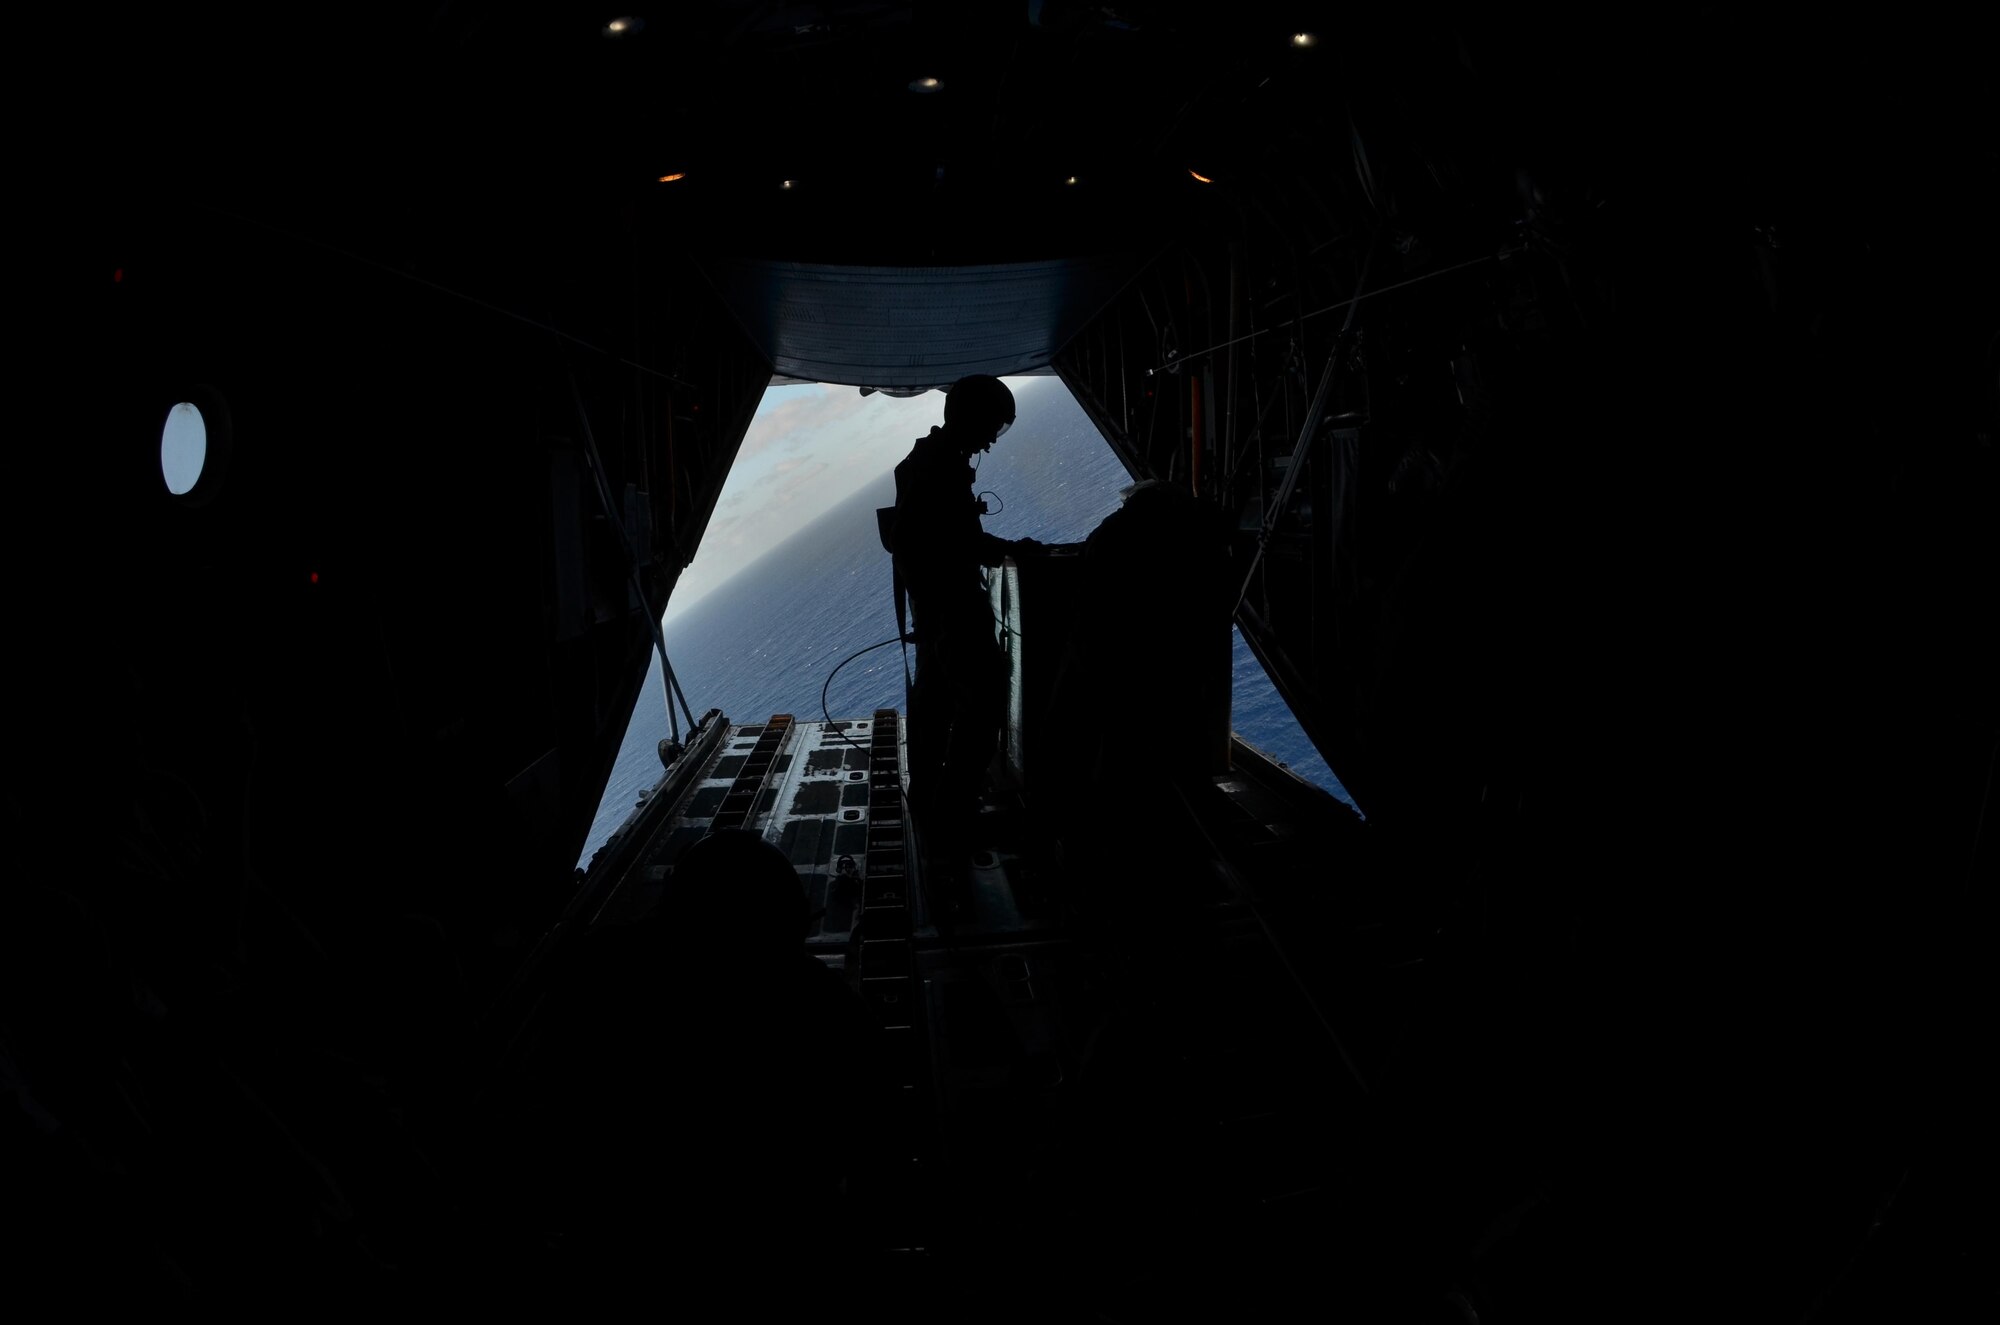 Staff Sgt. Nick Alarcon, 36th Airlift Squadron instructor loadmaster, inspects the last box of humanitarian assistance goods prior to its airdrop during an Operation Christmas Drop flight from Andersen Air Force Base, Guam, Dec. 14, 2012. Each year OCD provides aid to more than 30,000 islanders in Chuuk, Palau, Yap, Marshall Islands and Commonwealth of the Northern Mariana Islands. This year is the 61st anniversary of OCD, making it the longest running humanitarian mission in the world. In total, there are eight planned days of air drops, with 54 islands scheduled to receive humanitarian aid. (U.S. Air Force photo/Staff Sgt. Alexandre Montes/Released)